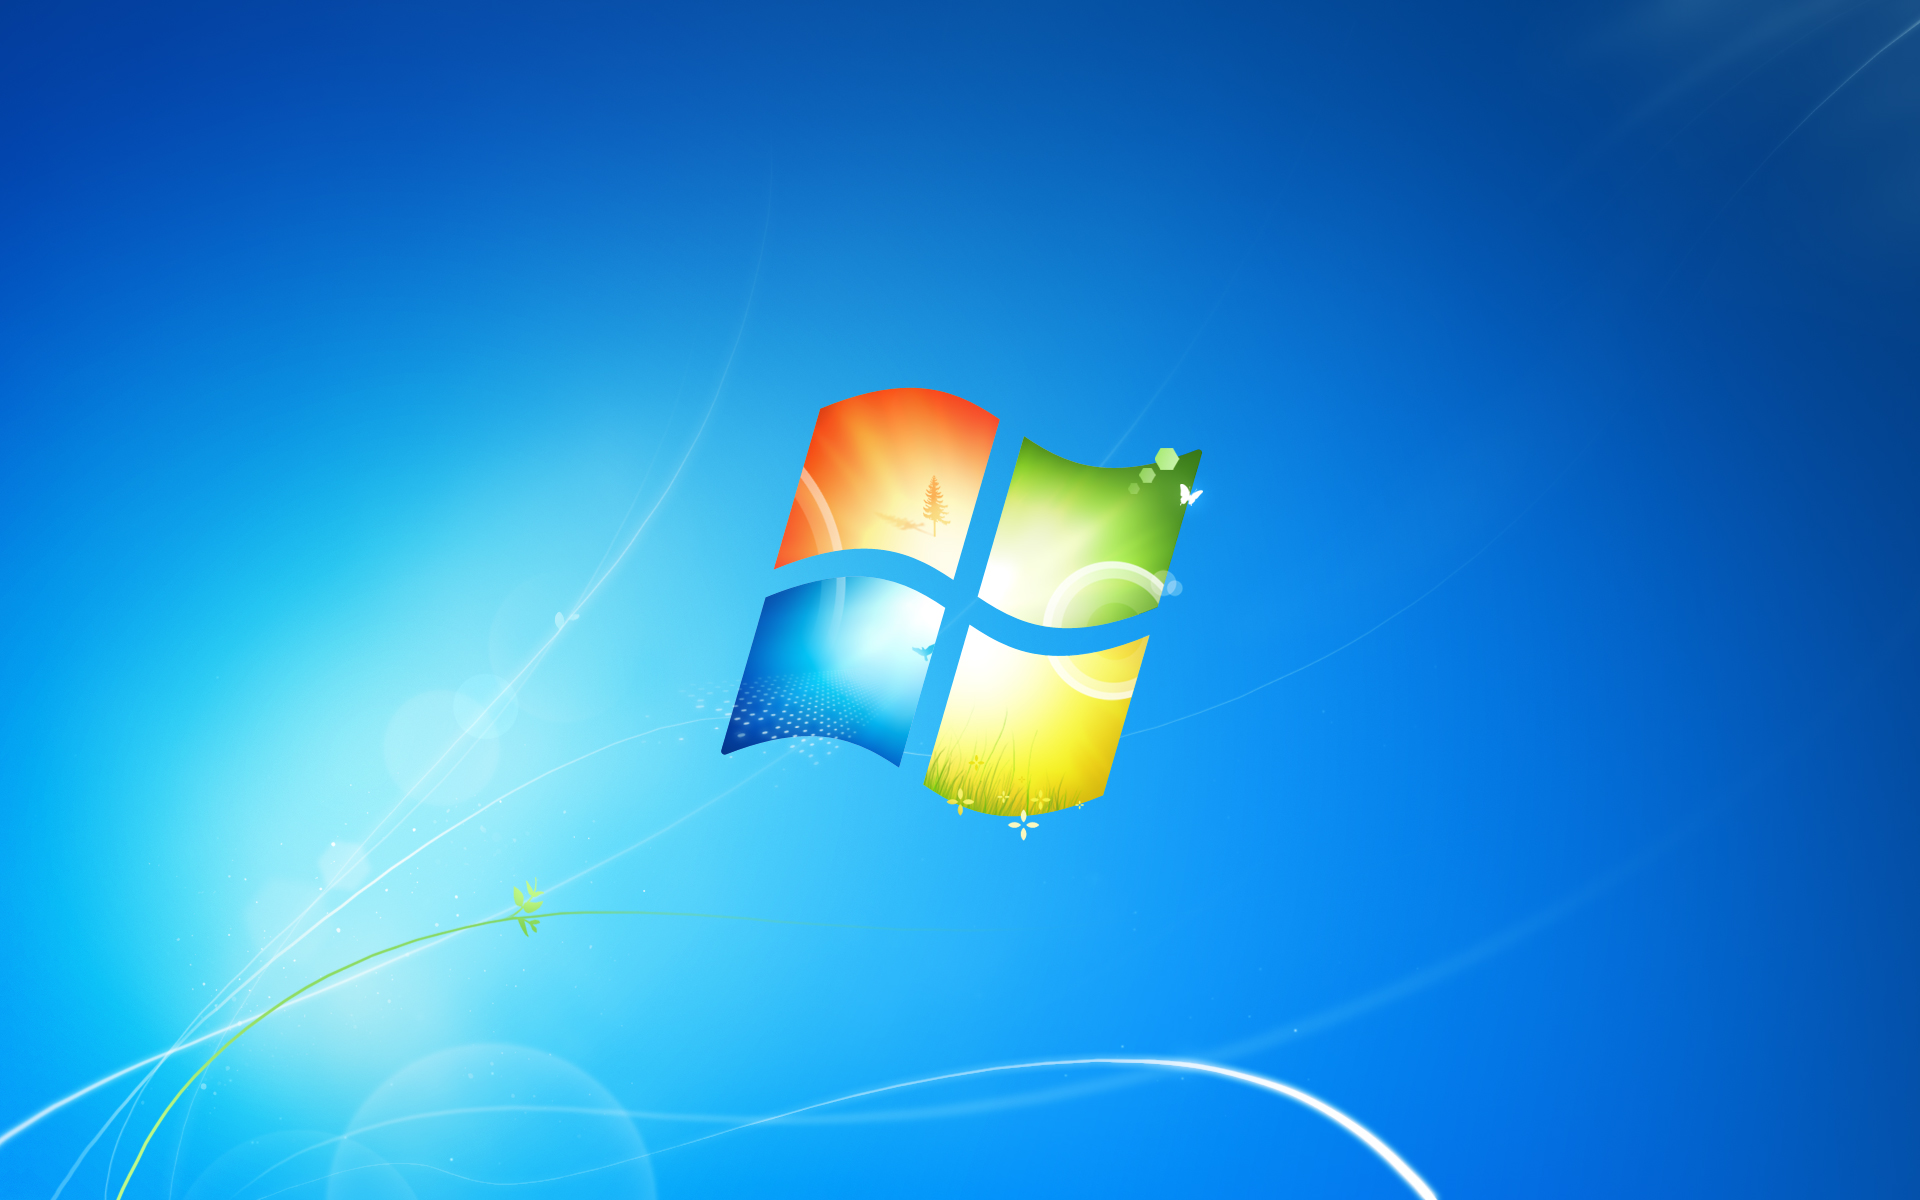 file name official windows 7 wallpapers posted piph category windows